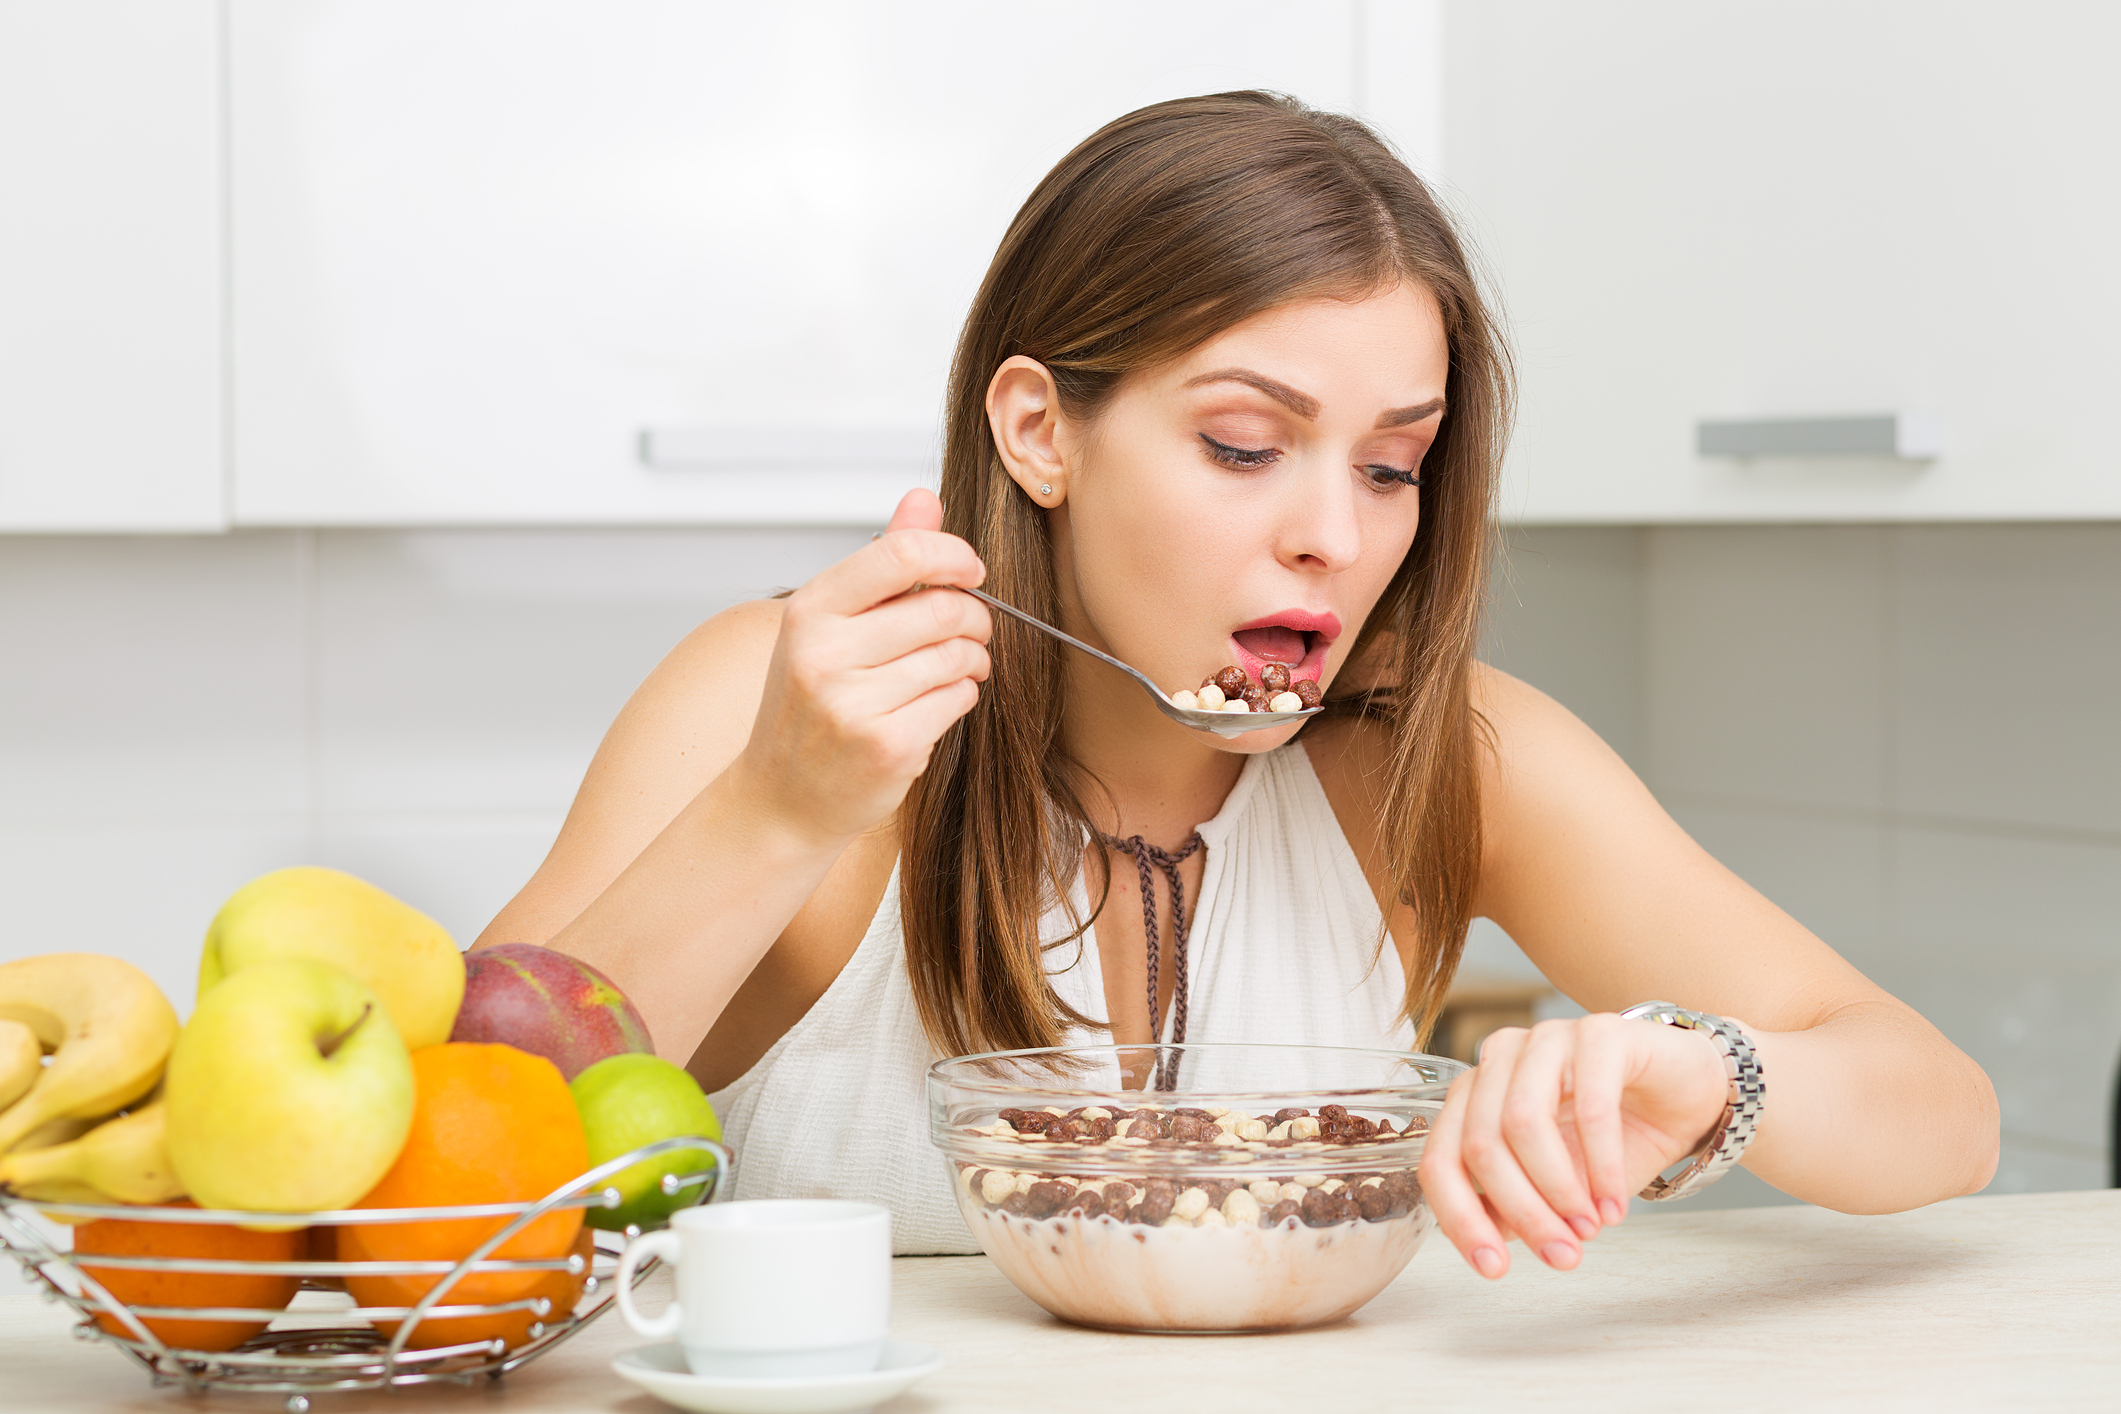 Your eating habits are hurting y...